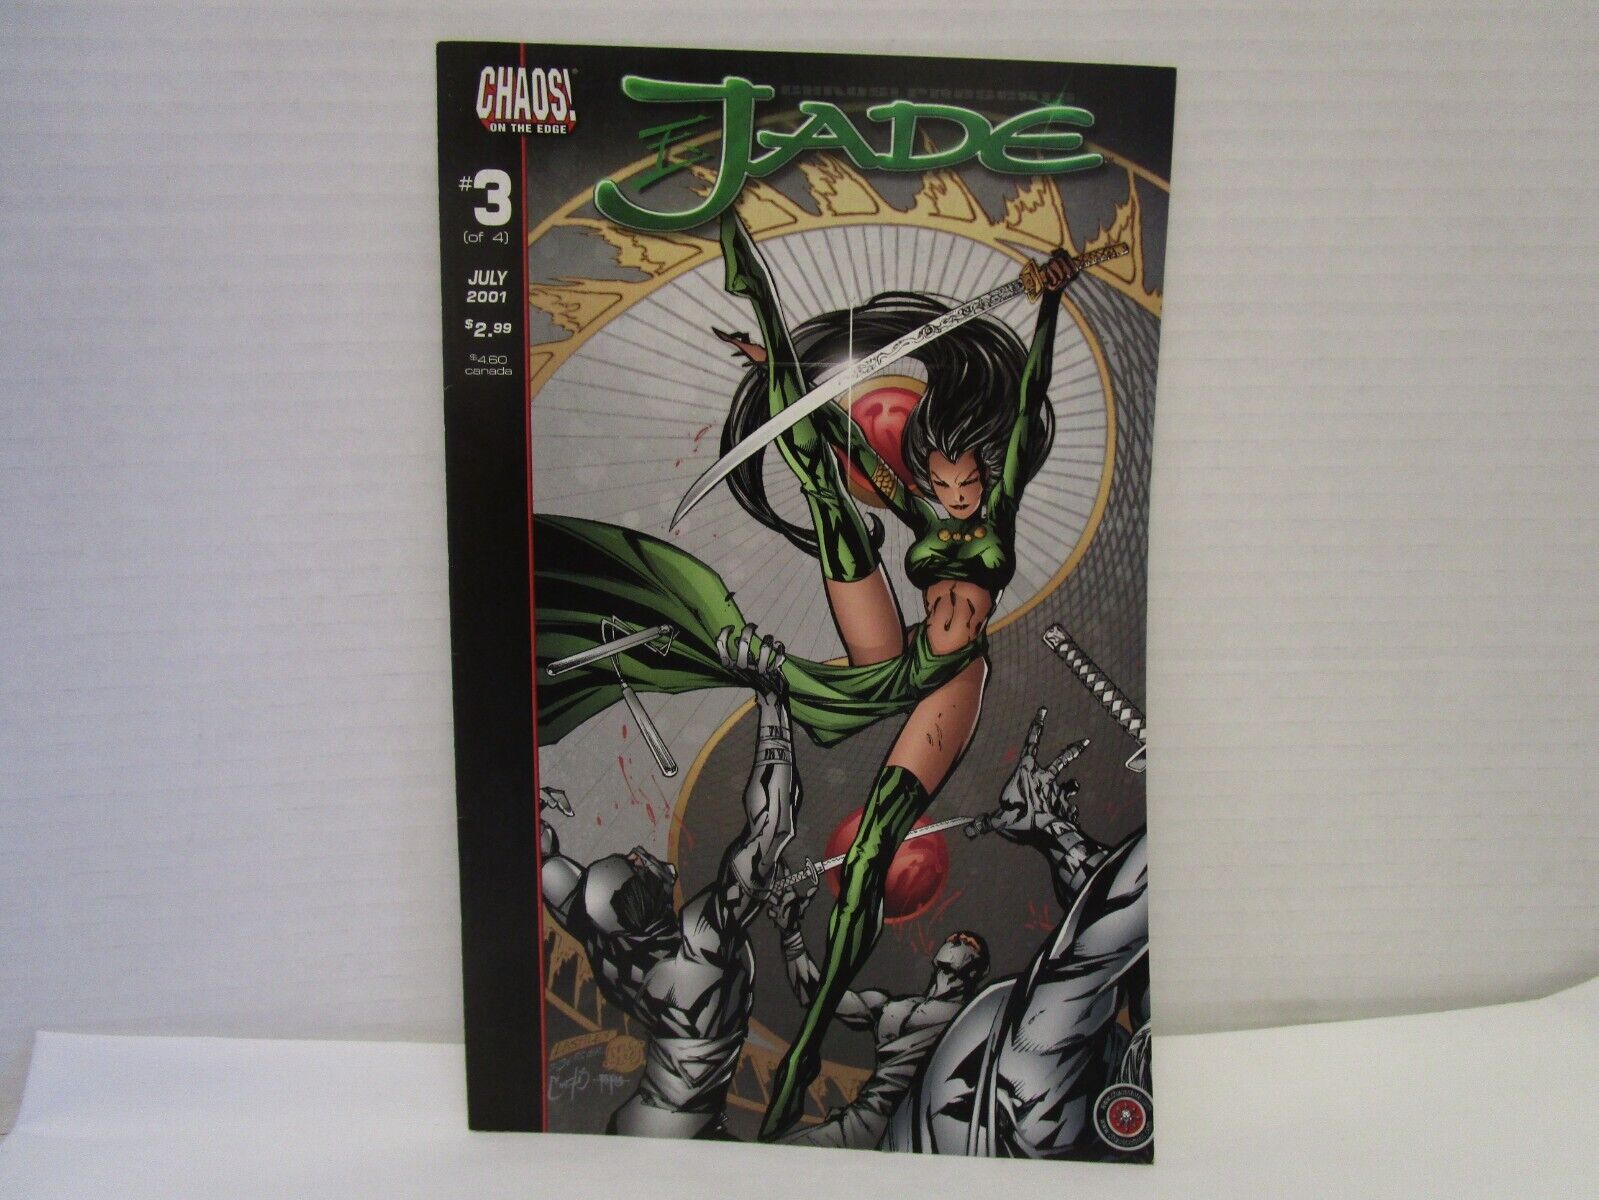 CHAOS! Presents  On The Edge Comics  Jade  #4 OF 4 July 2001